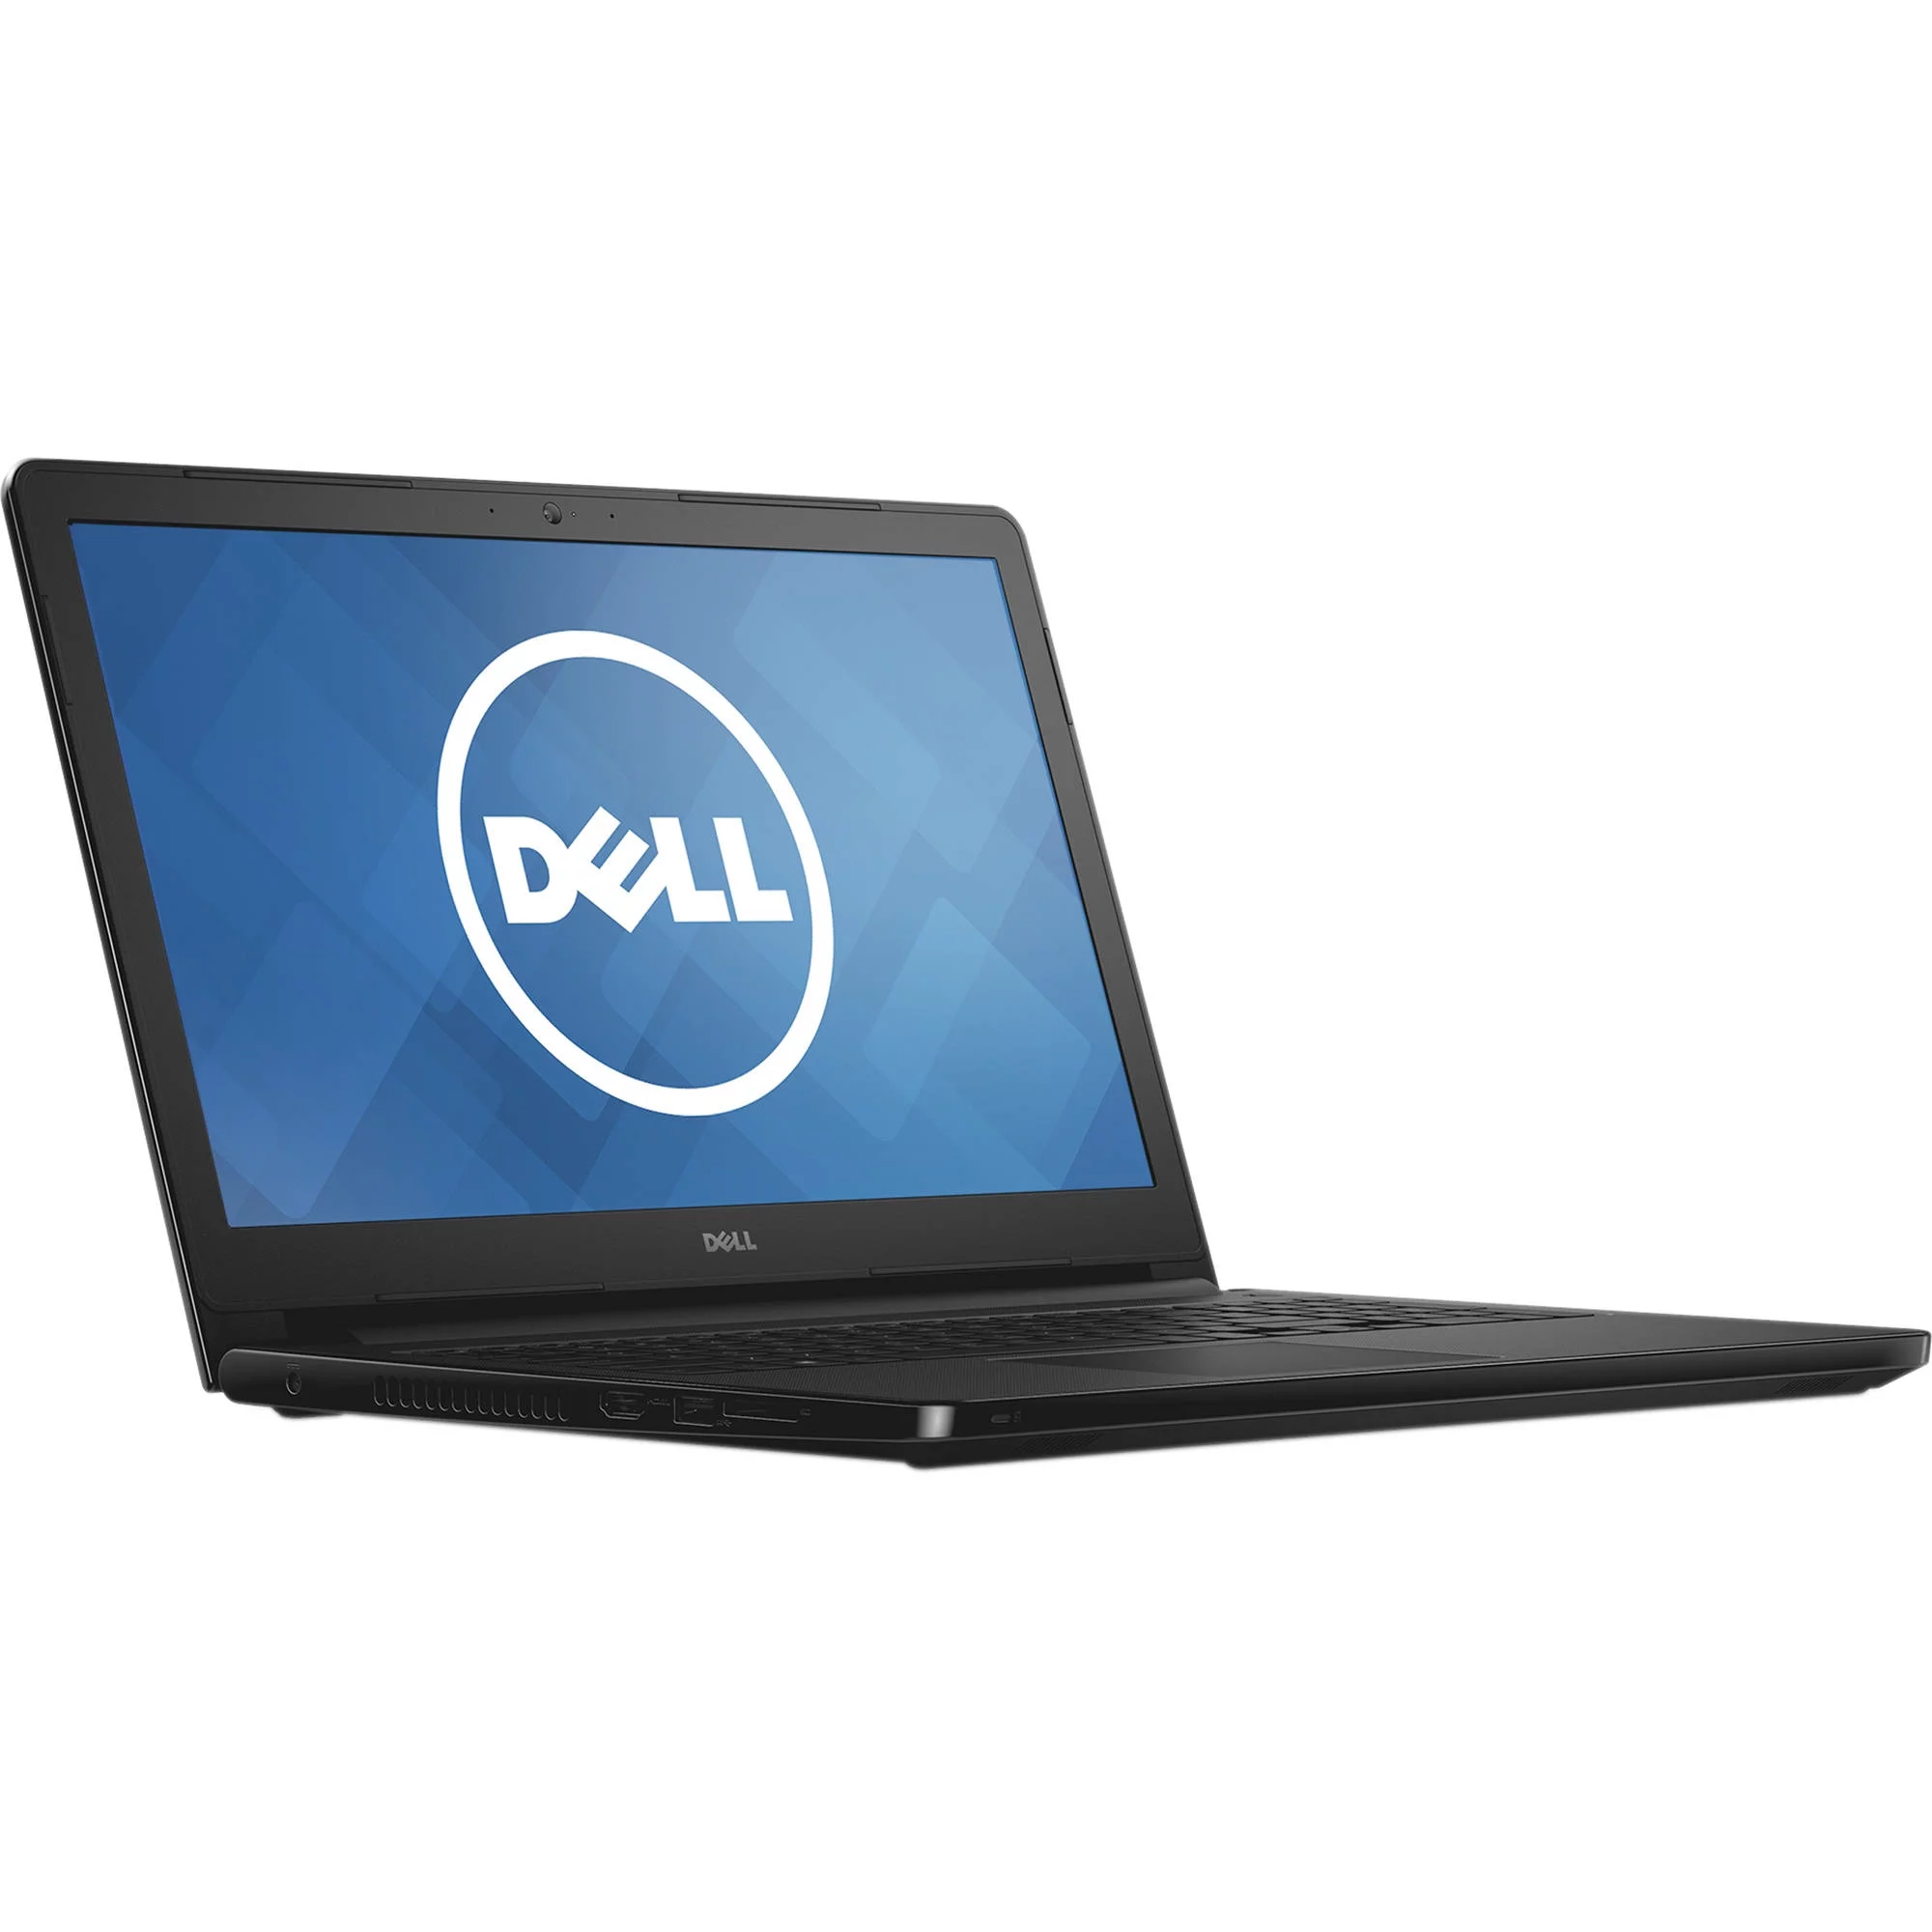 Dell Inspiron 15 5551 Notebook